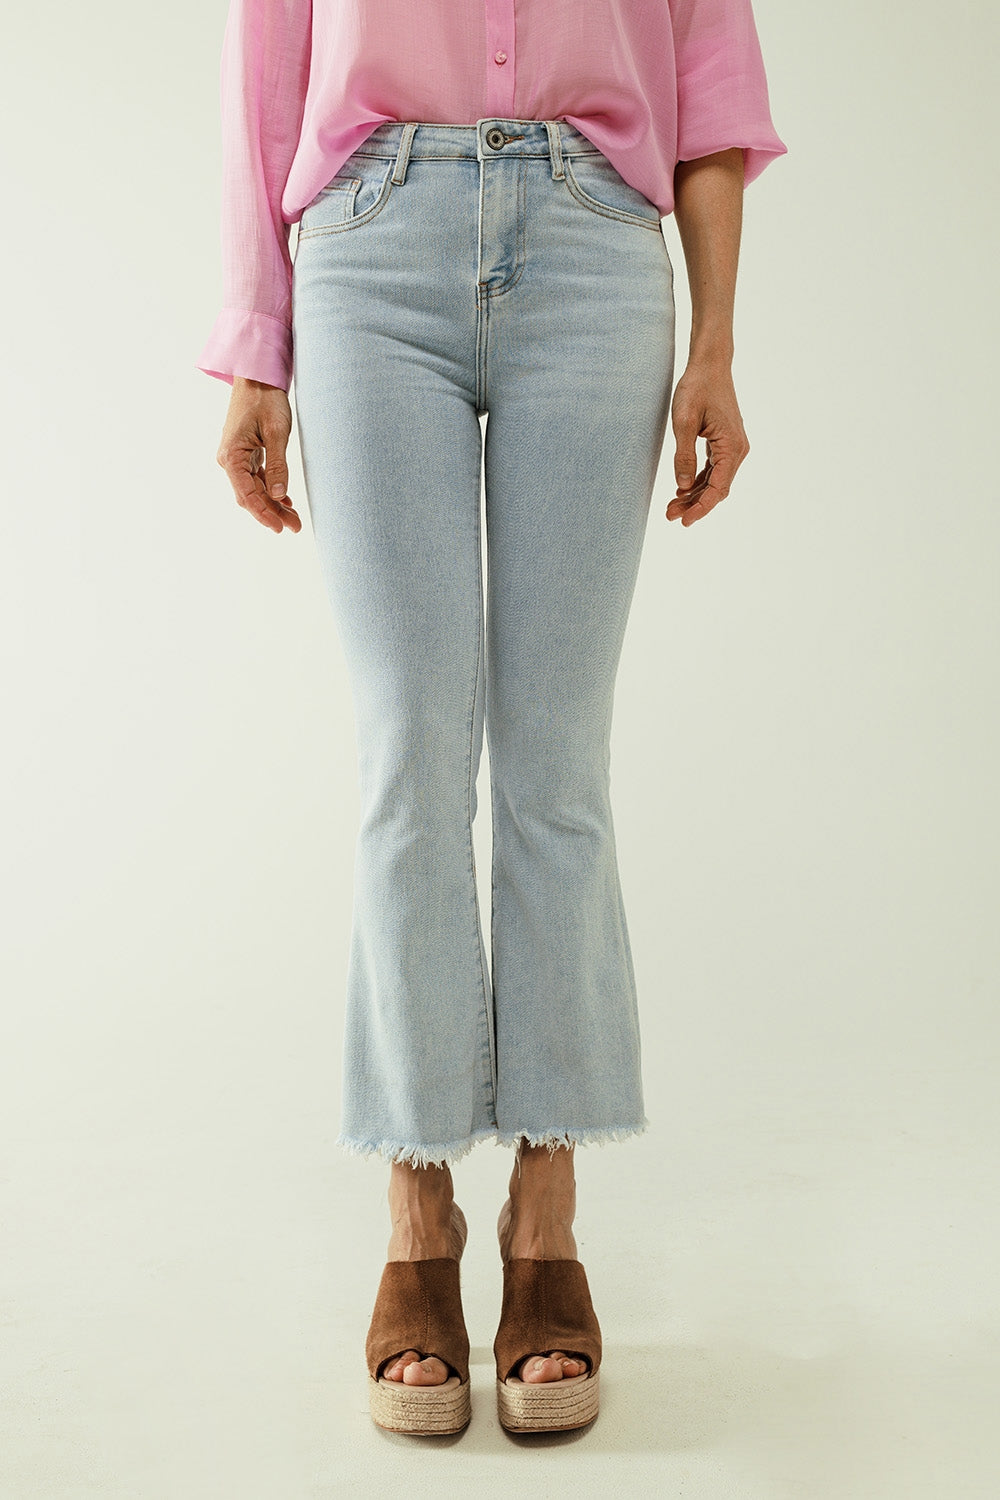 Q2 Flared light blue jeans with five pockets and seamless finish